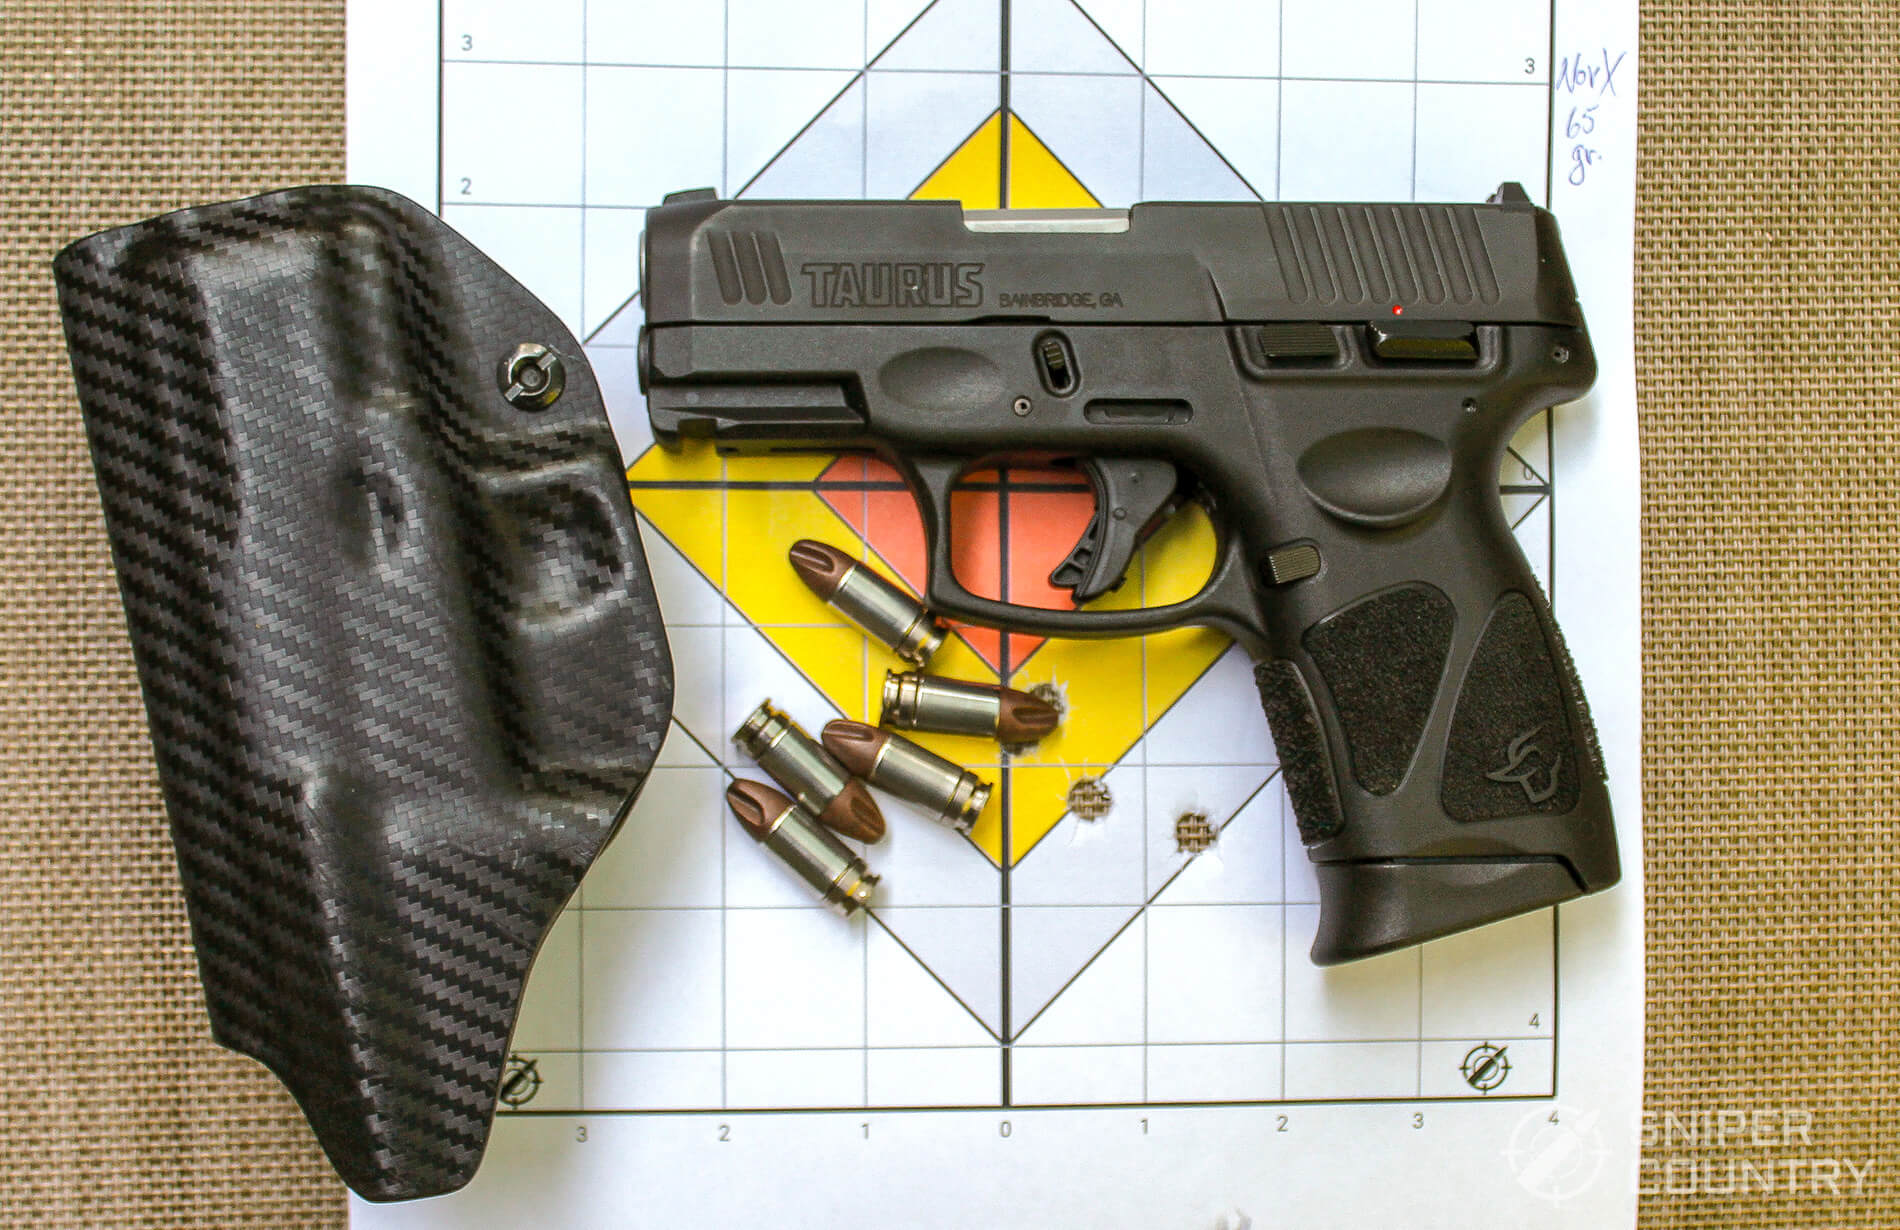 Taurus G3c Review: The best budget 9mm? 